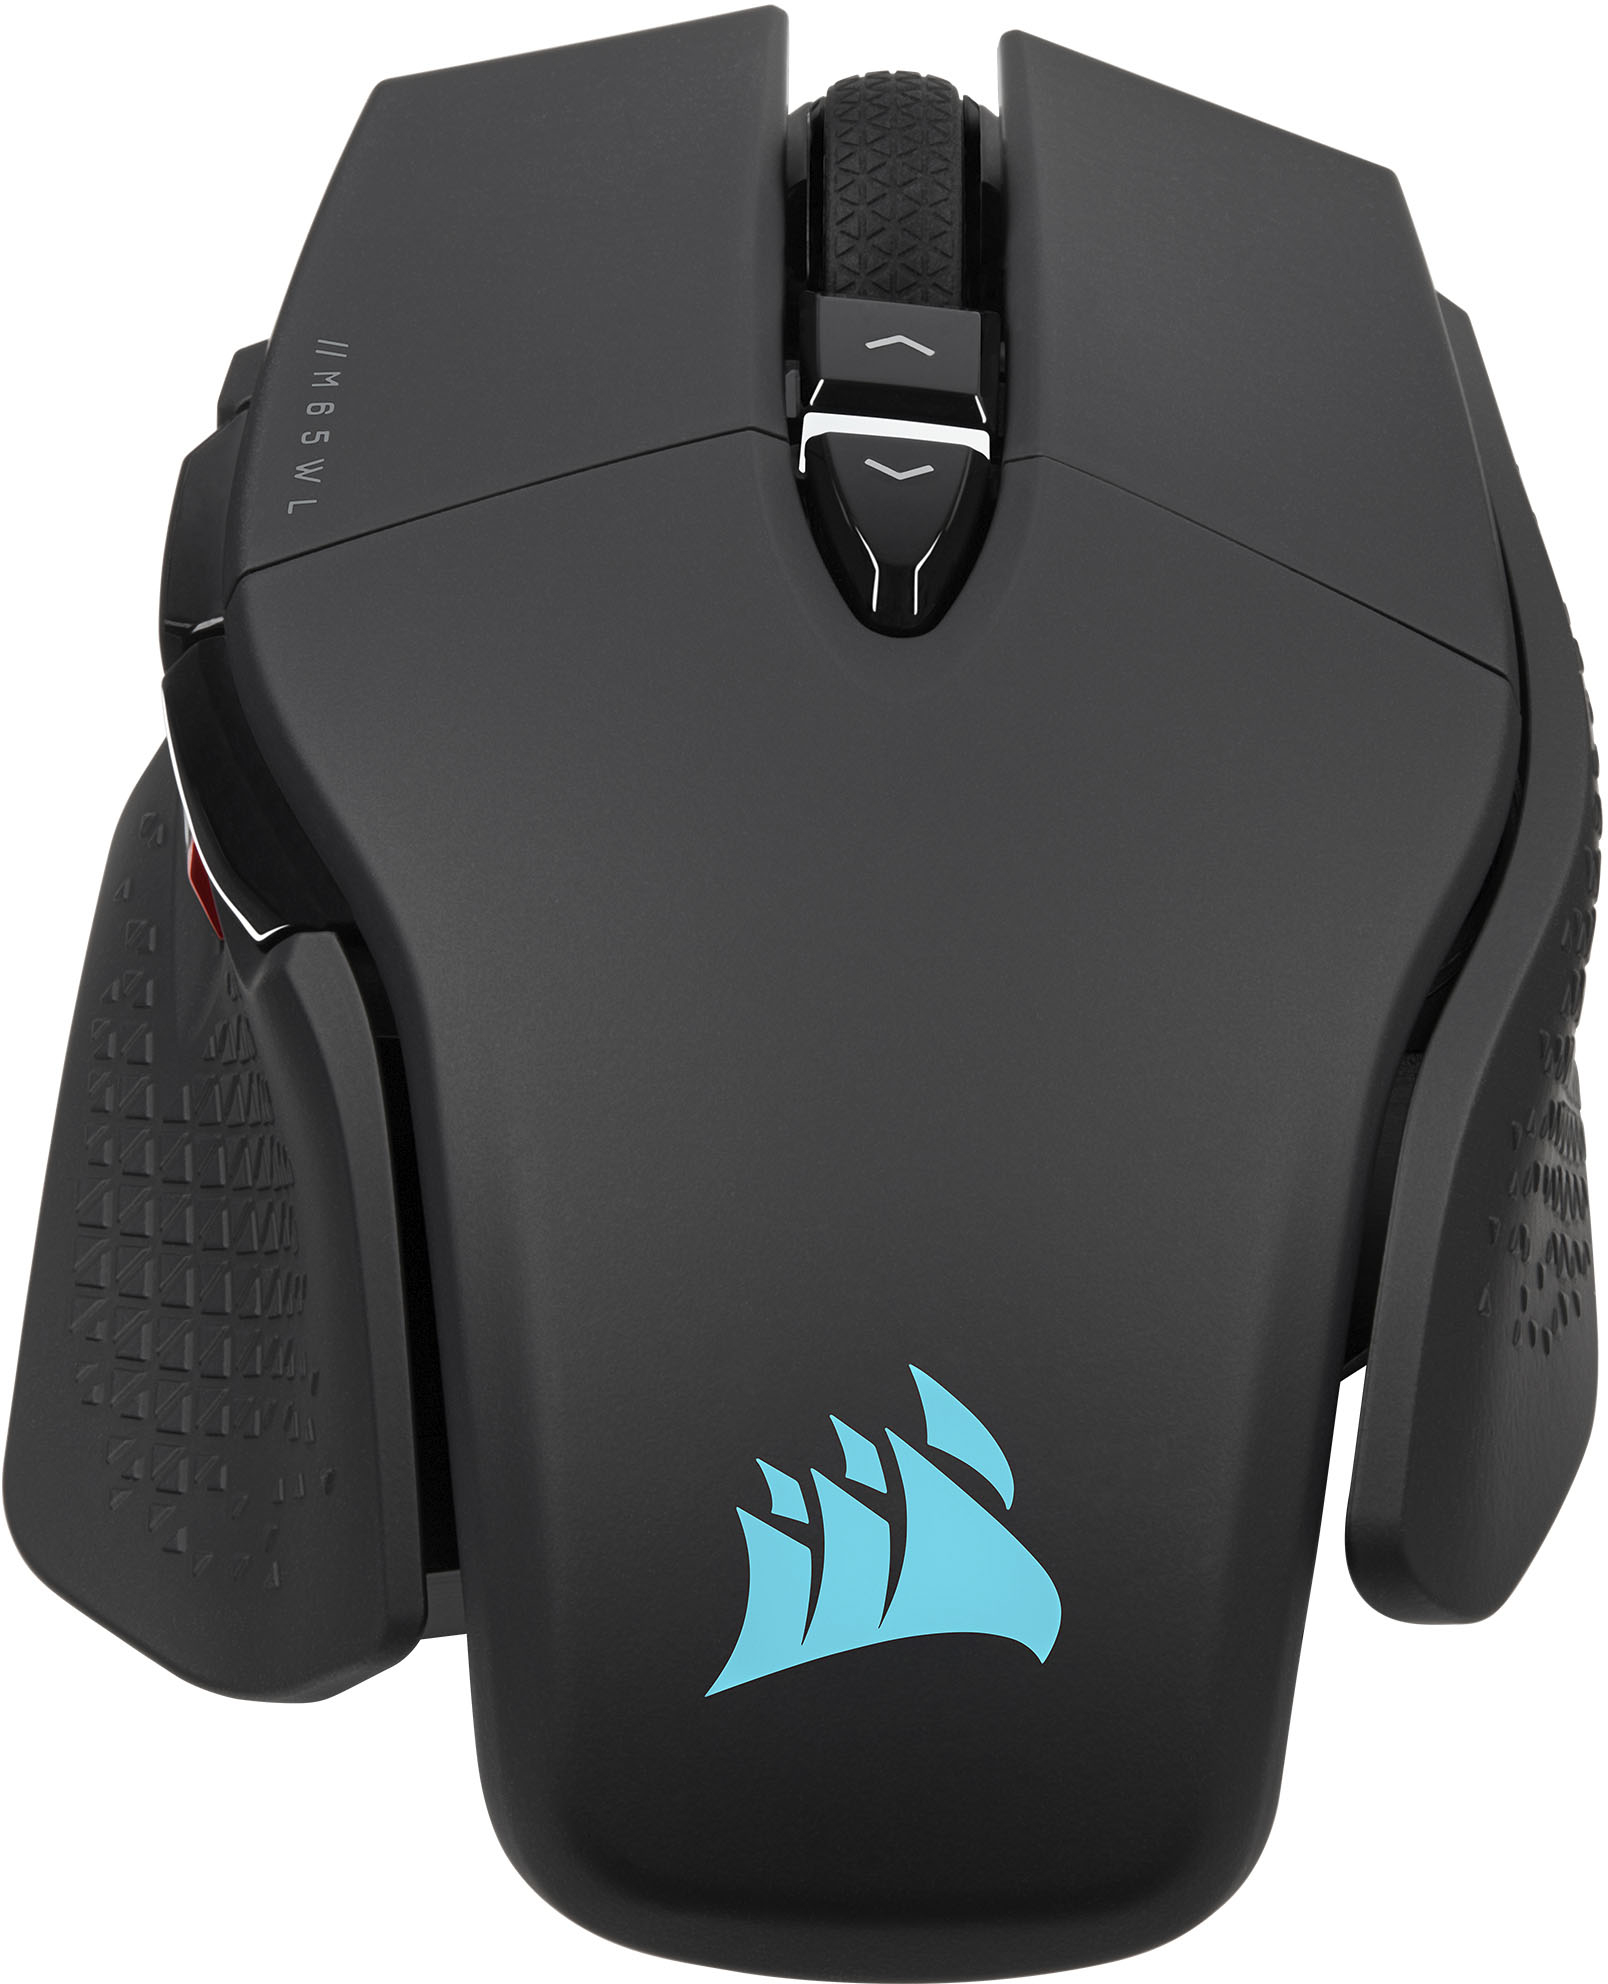 CORSAIR NIGHTSWORD RGB Gaming Mouse For FPS, MOBA - 18,000 DPI - 10  Programmable Buttons - Weight System - iCUE Compatible - Black